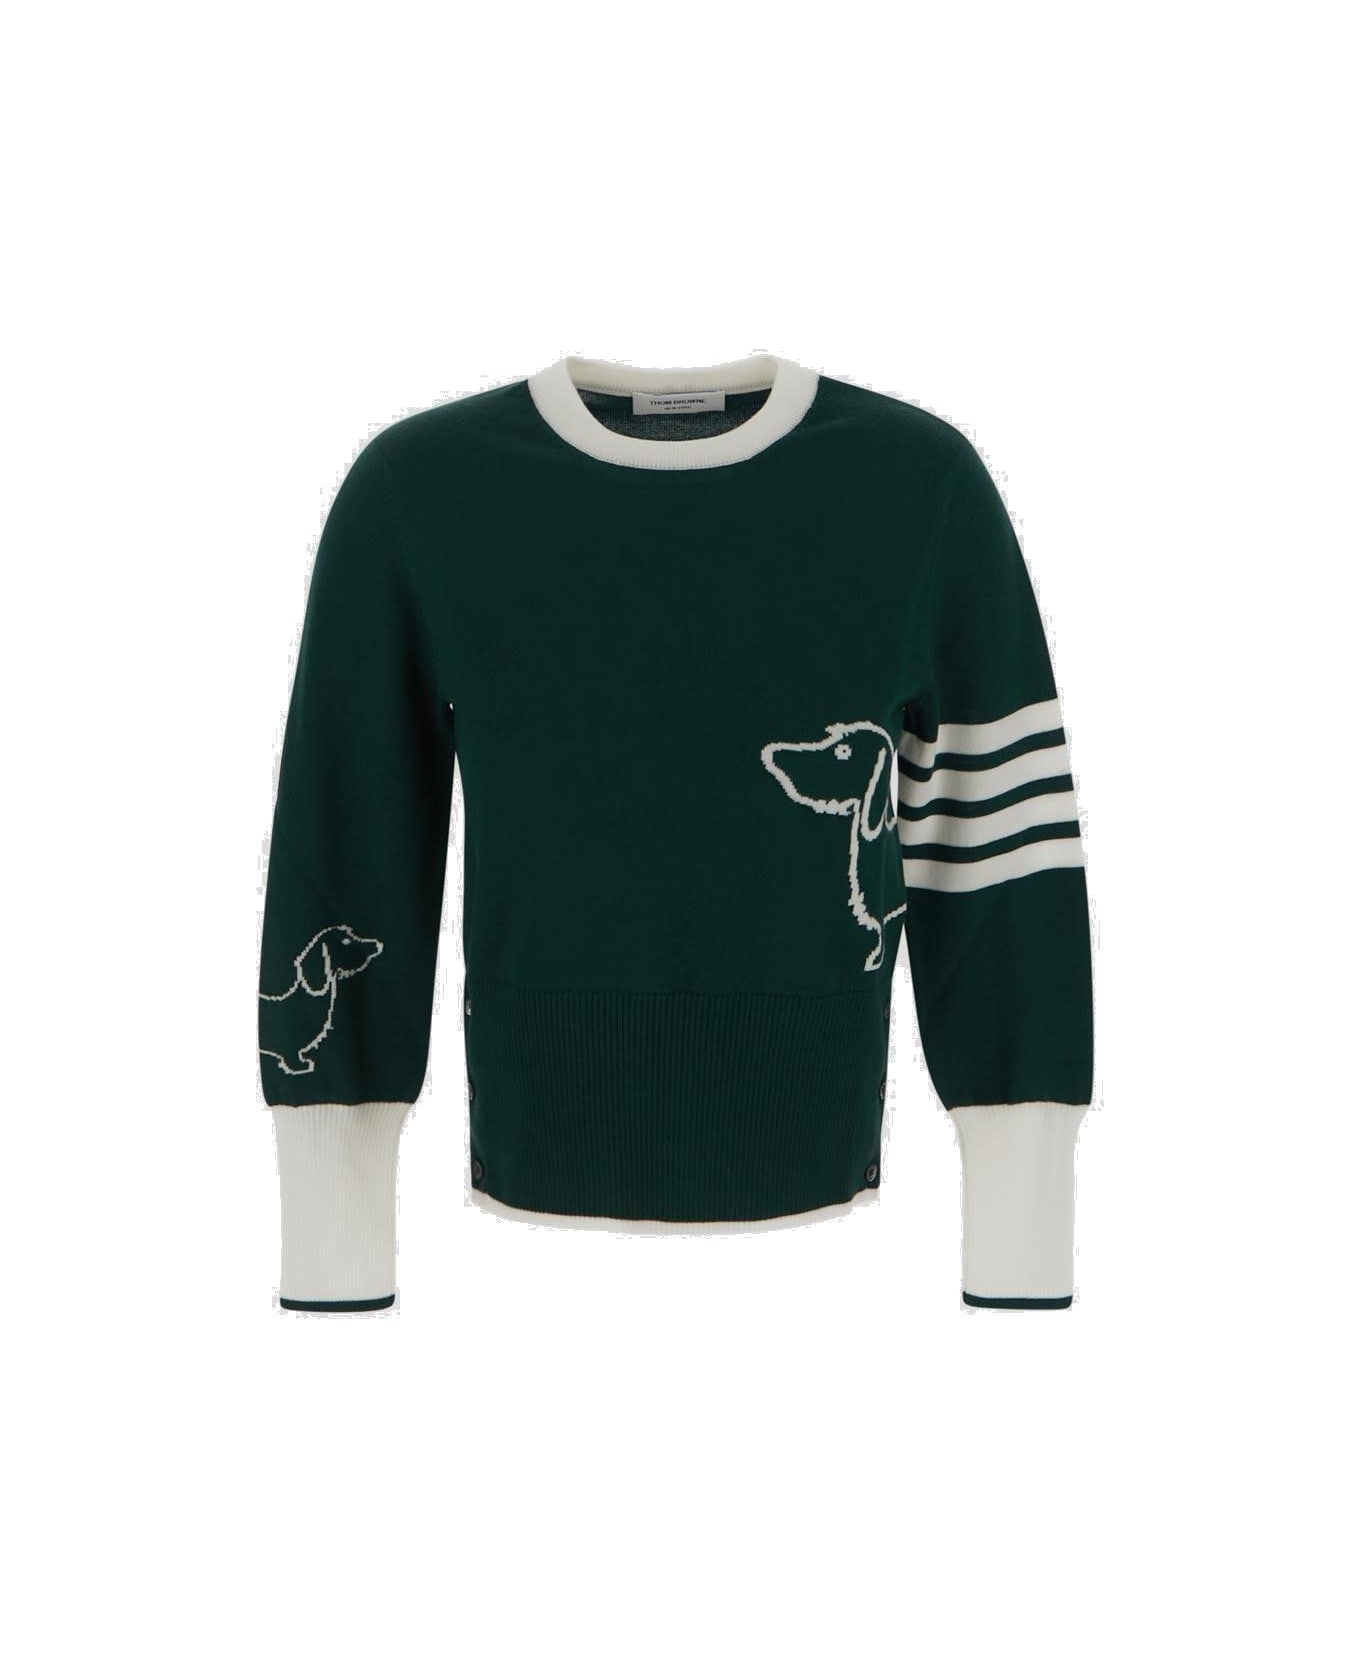 Thom Browne Long-sleeved Crewneck Knitted Jumper - Green